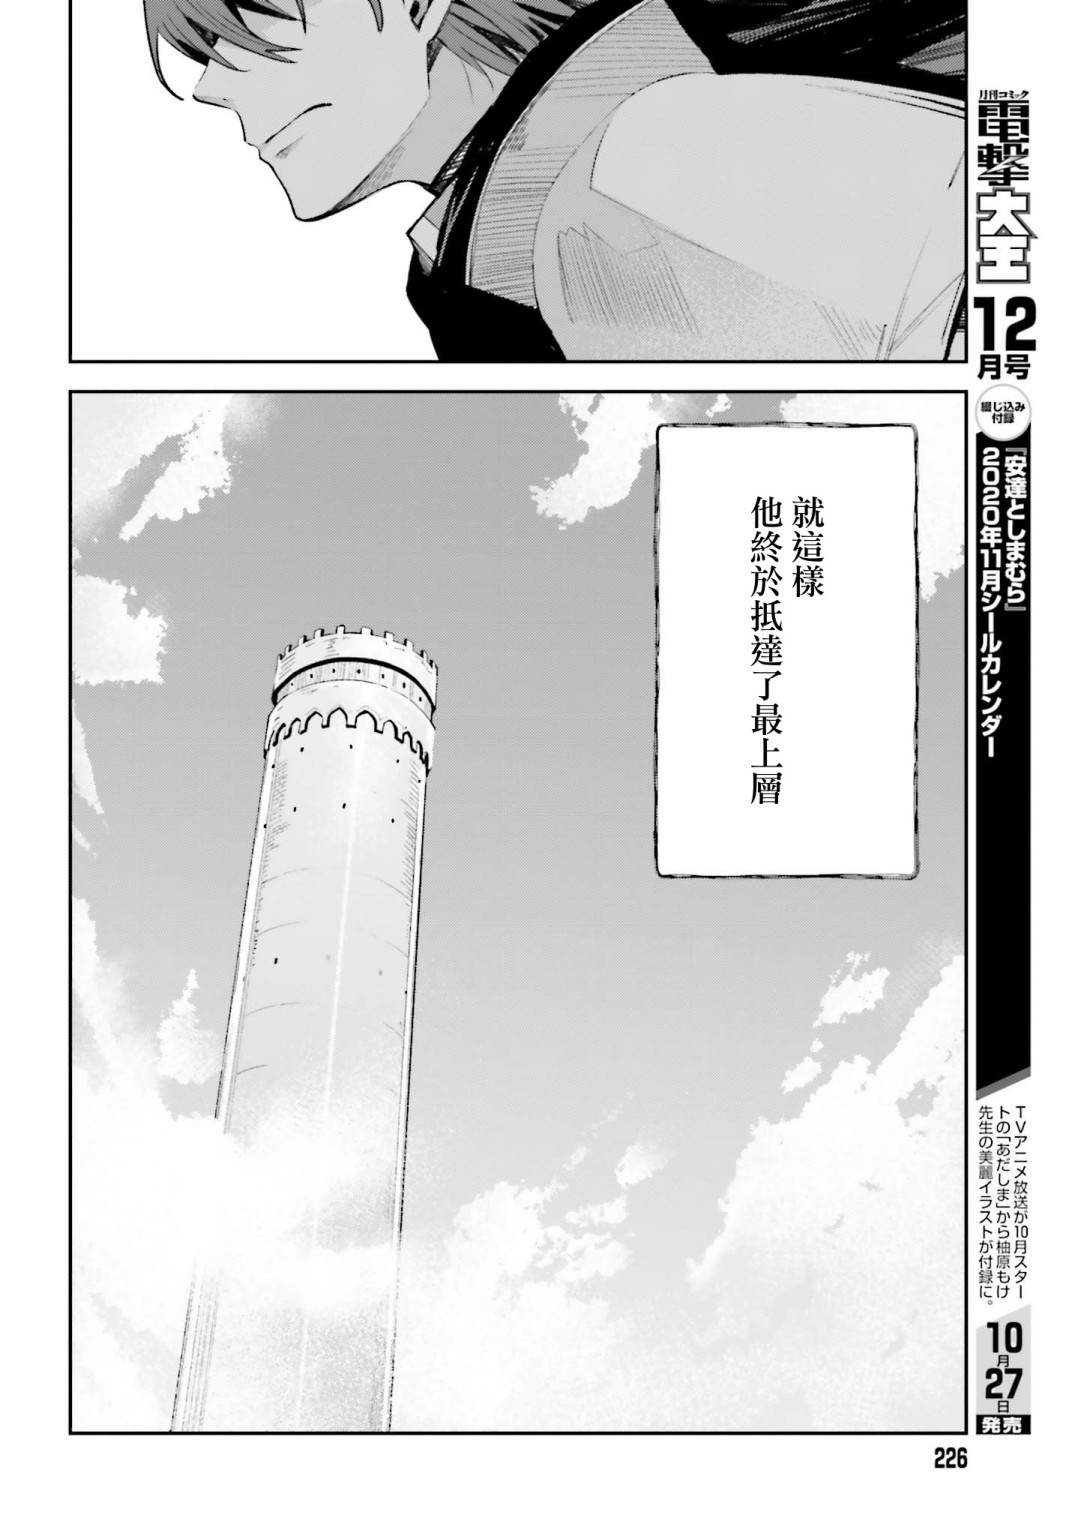 Unnamed Memory - 第01话(1/2) - 4